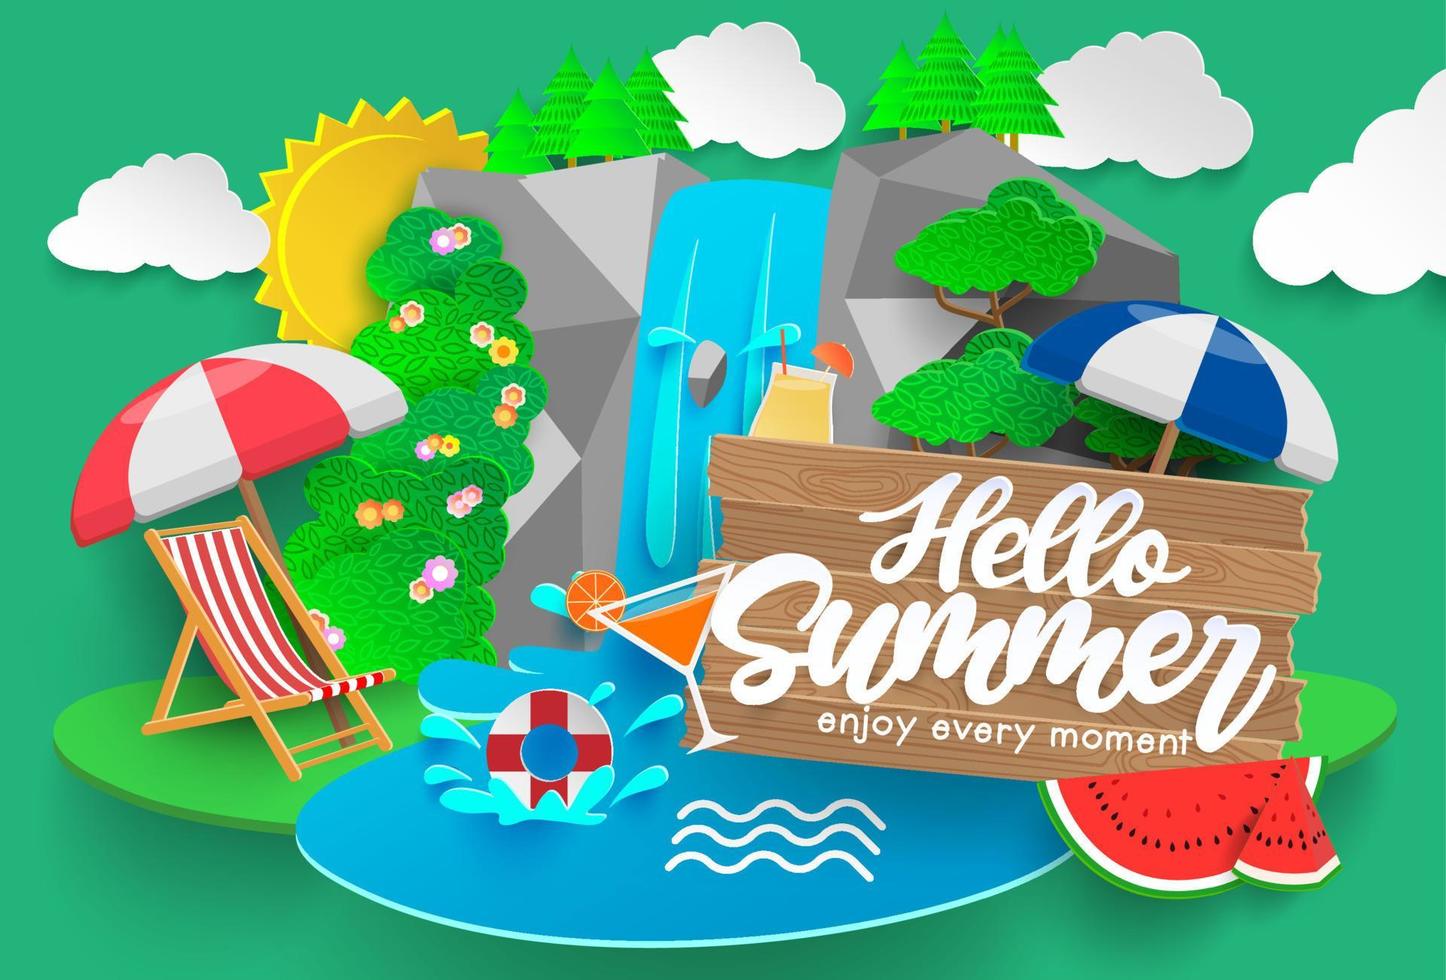 Hello summer vector banner design. Hello summer text in paper cut nature forest background with waterfall, drinks and chair elements for relax outdoor tropical season vacation. Vector illustration